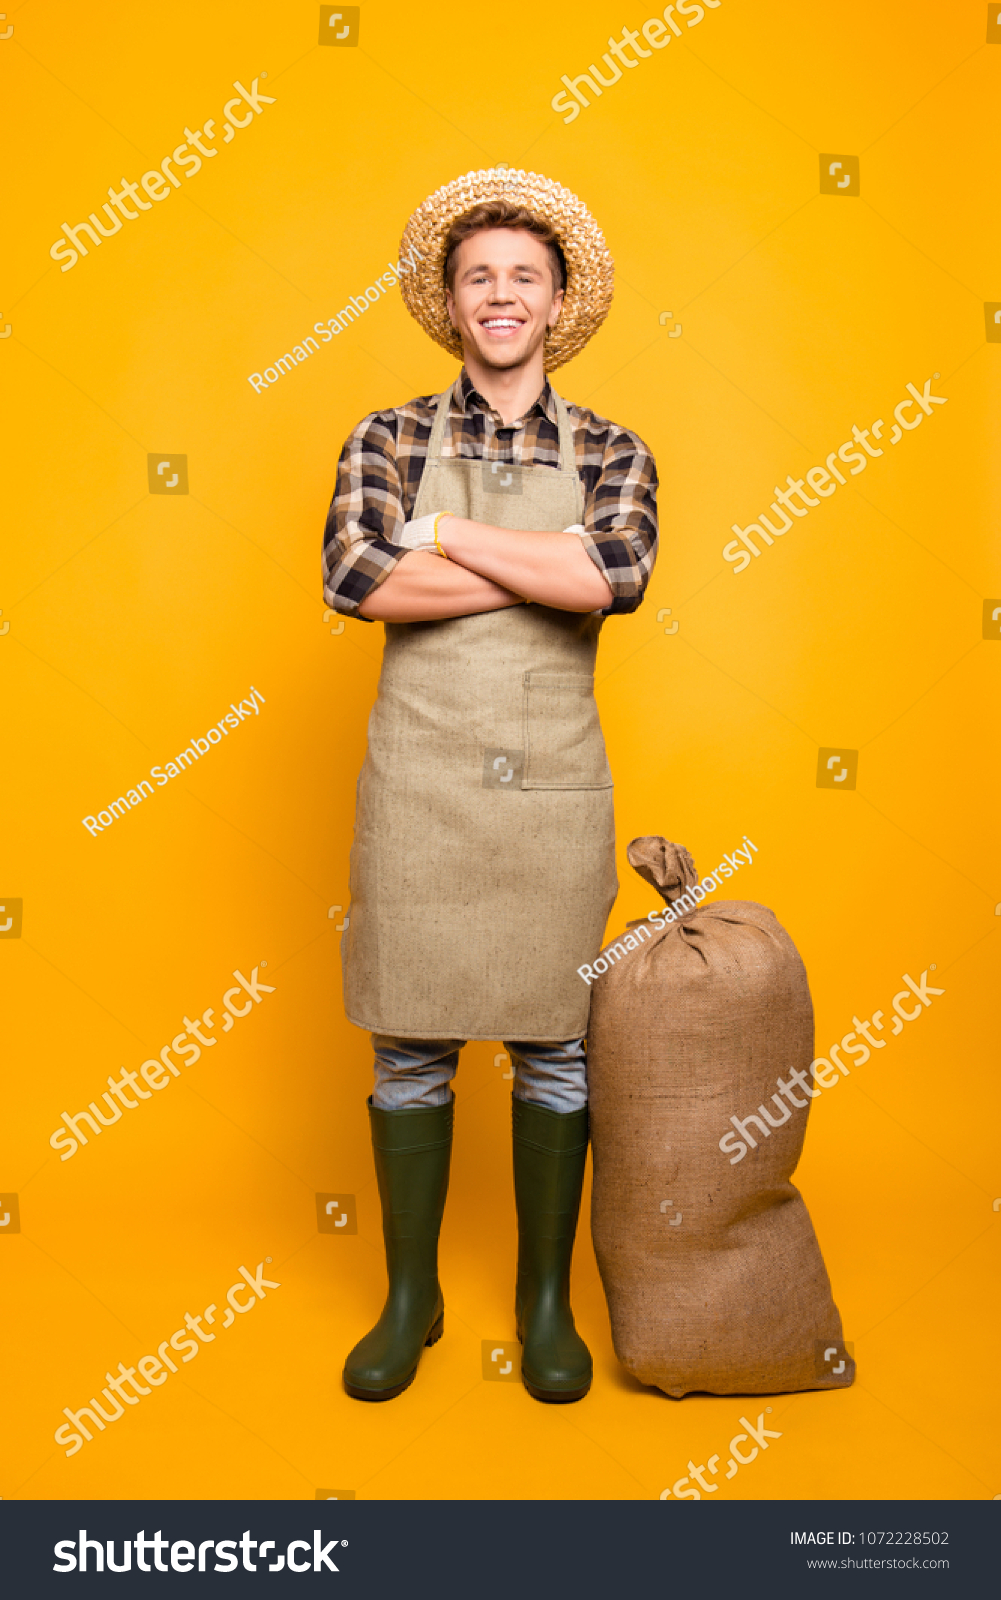 Non-gmo gmo-free people person many brown healthcare entrepreneur concept. Vertical full-length portrait of friendly glad with crossed folded arms man isolated on background wearing hay hat #1072228502